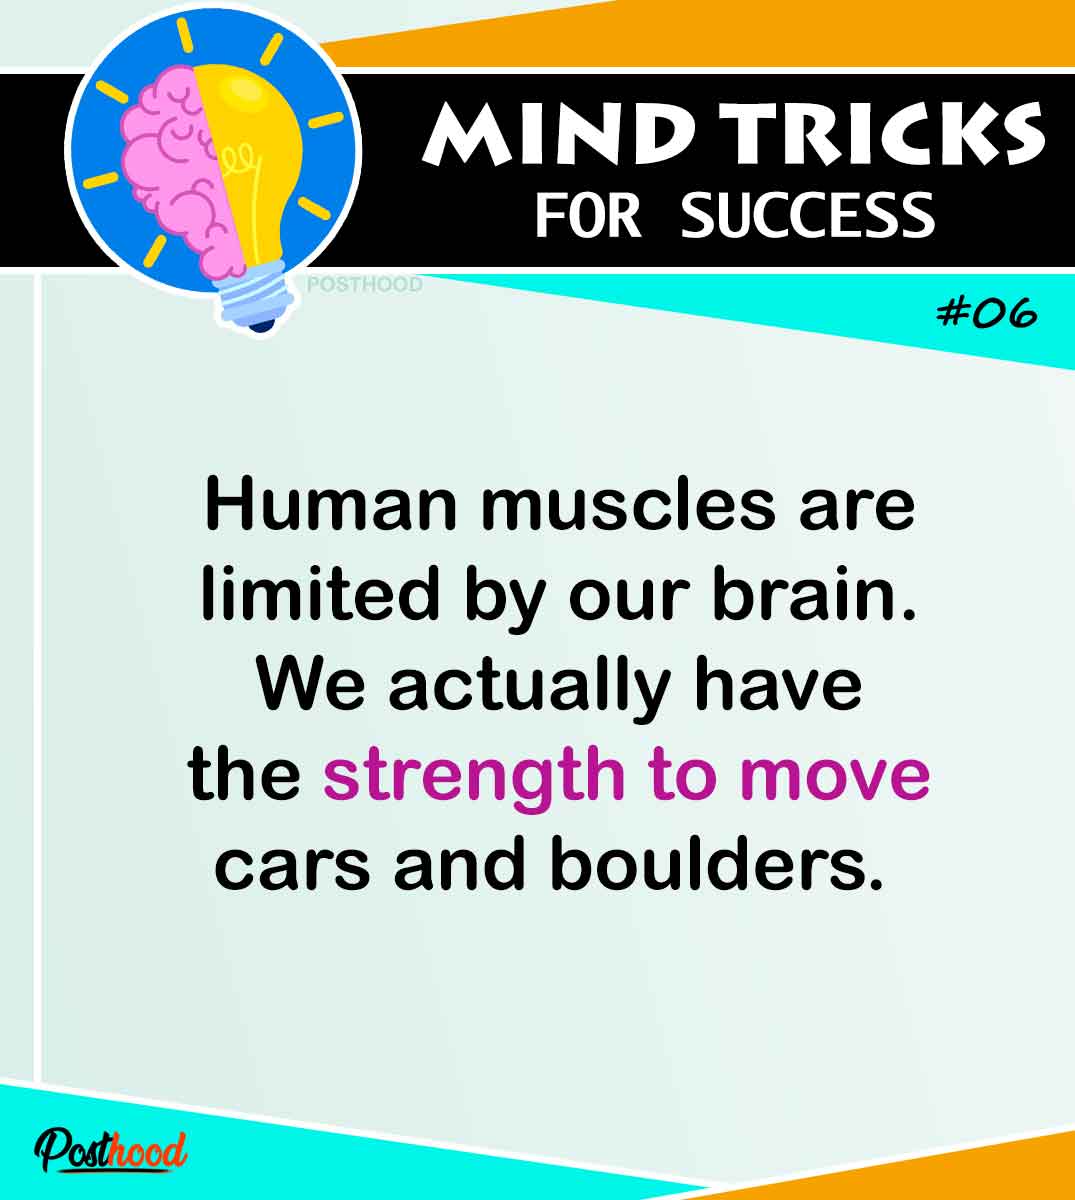 35 amazing mind tricks for success and gets the right mindset to achieve your goals and desired results. Use them in everyday life to boost your productivity.